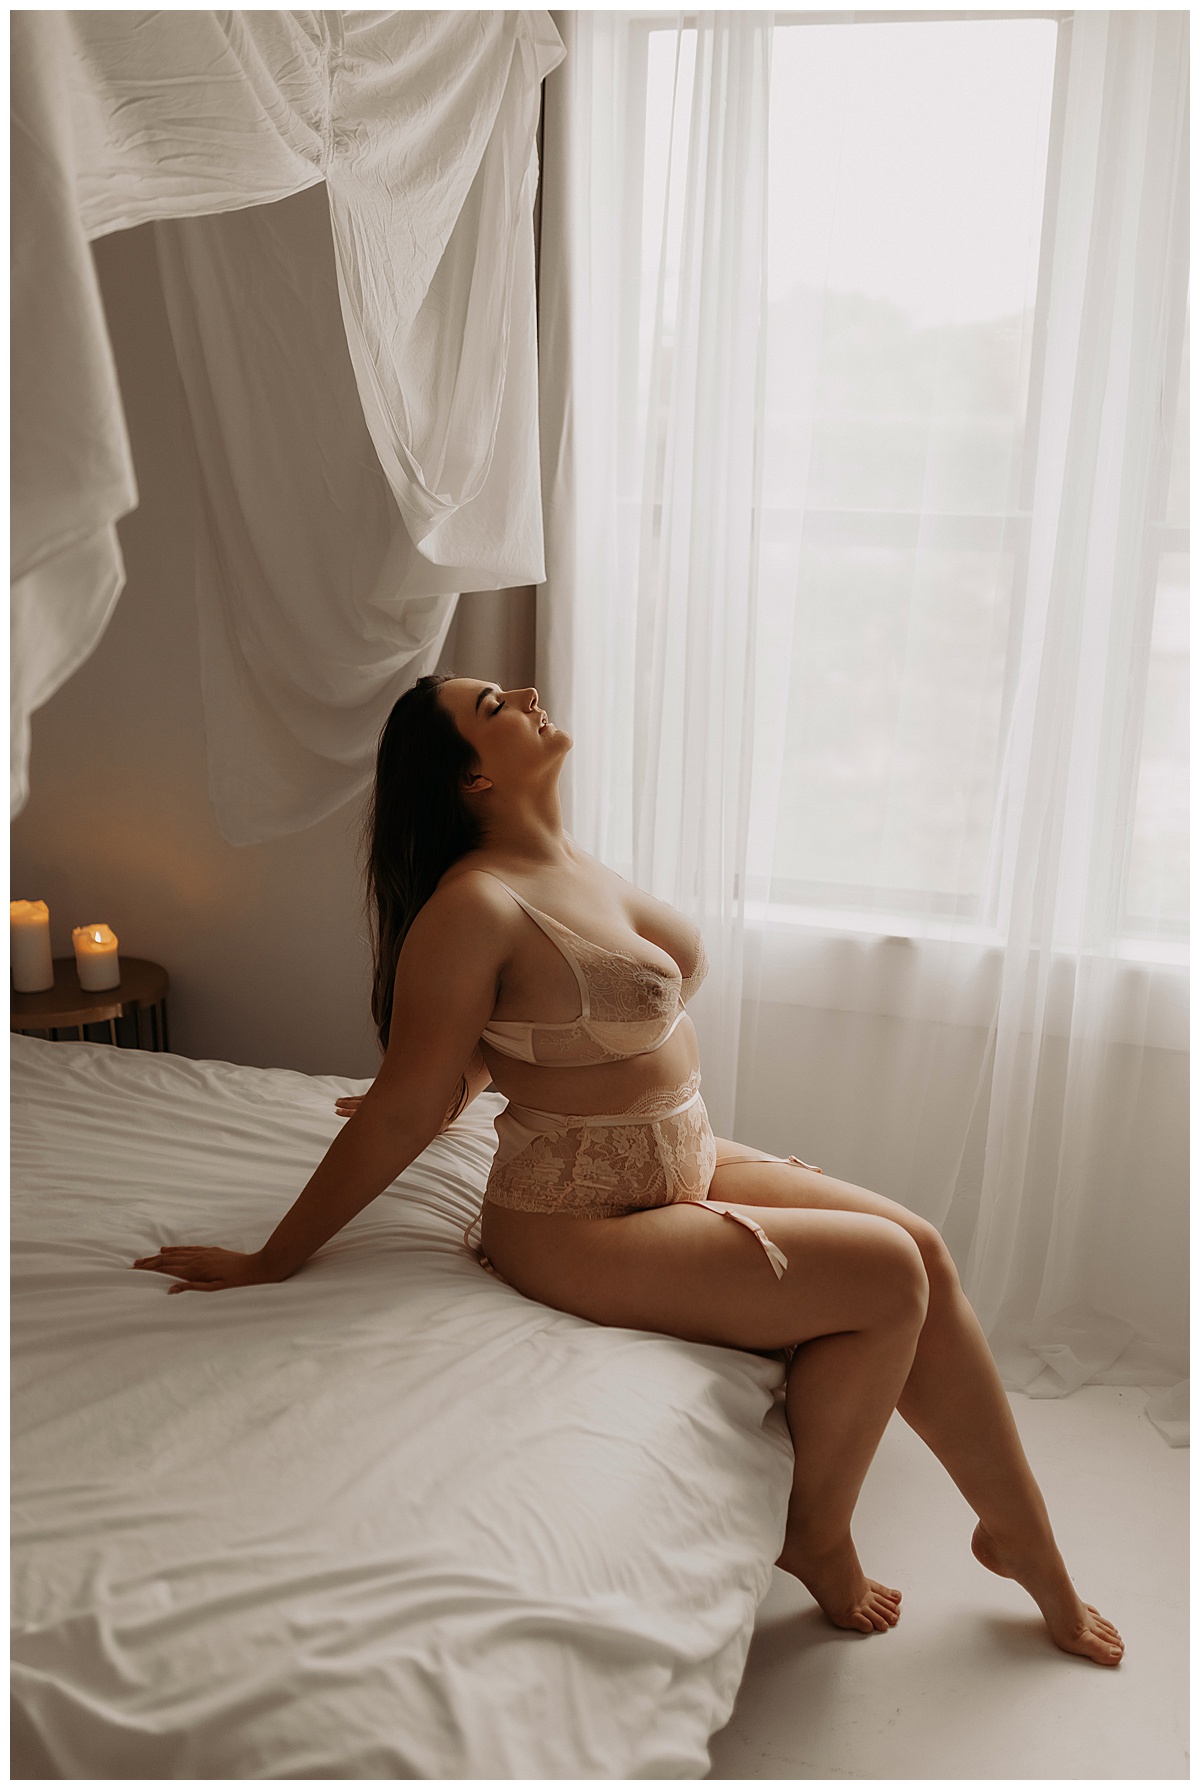 Woman leans back onto a bed in lingerie demonstrating how you can Discover Your Inner Beauty